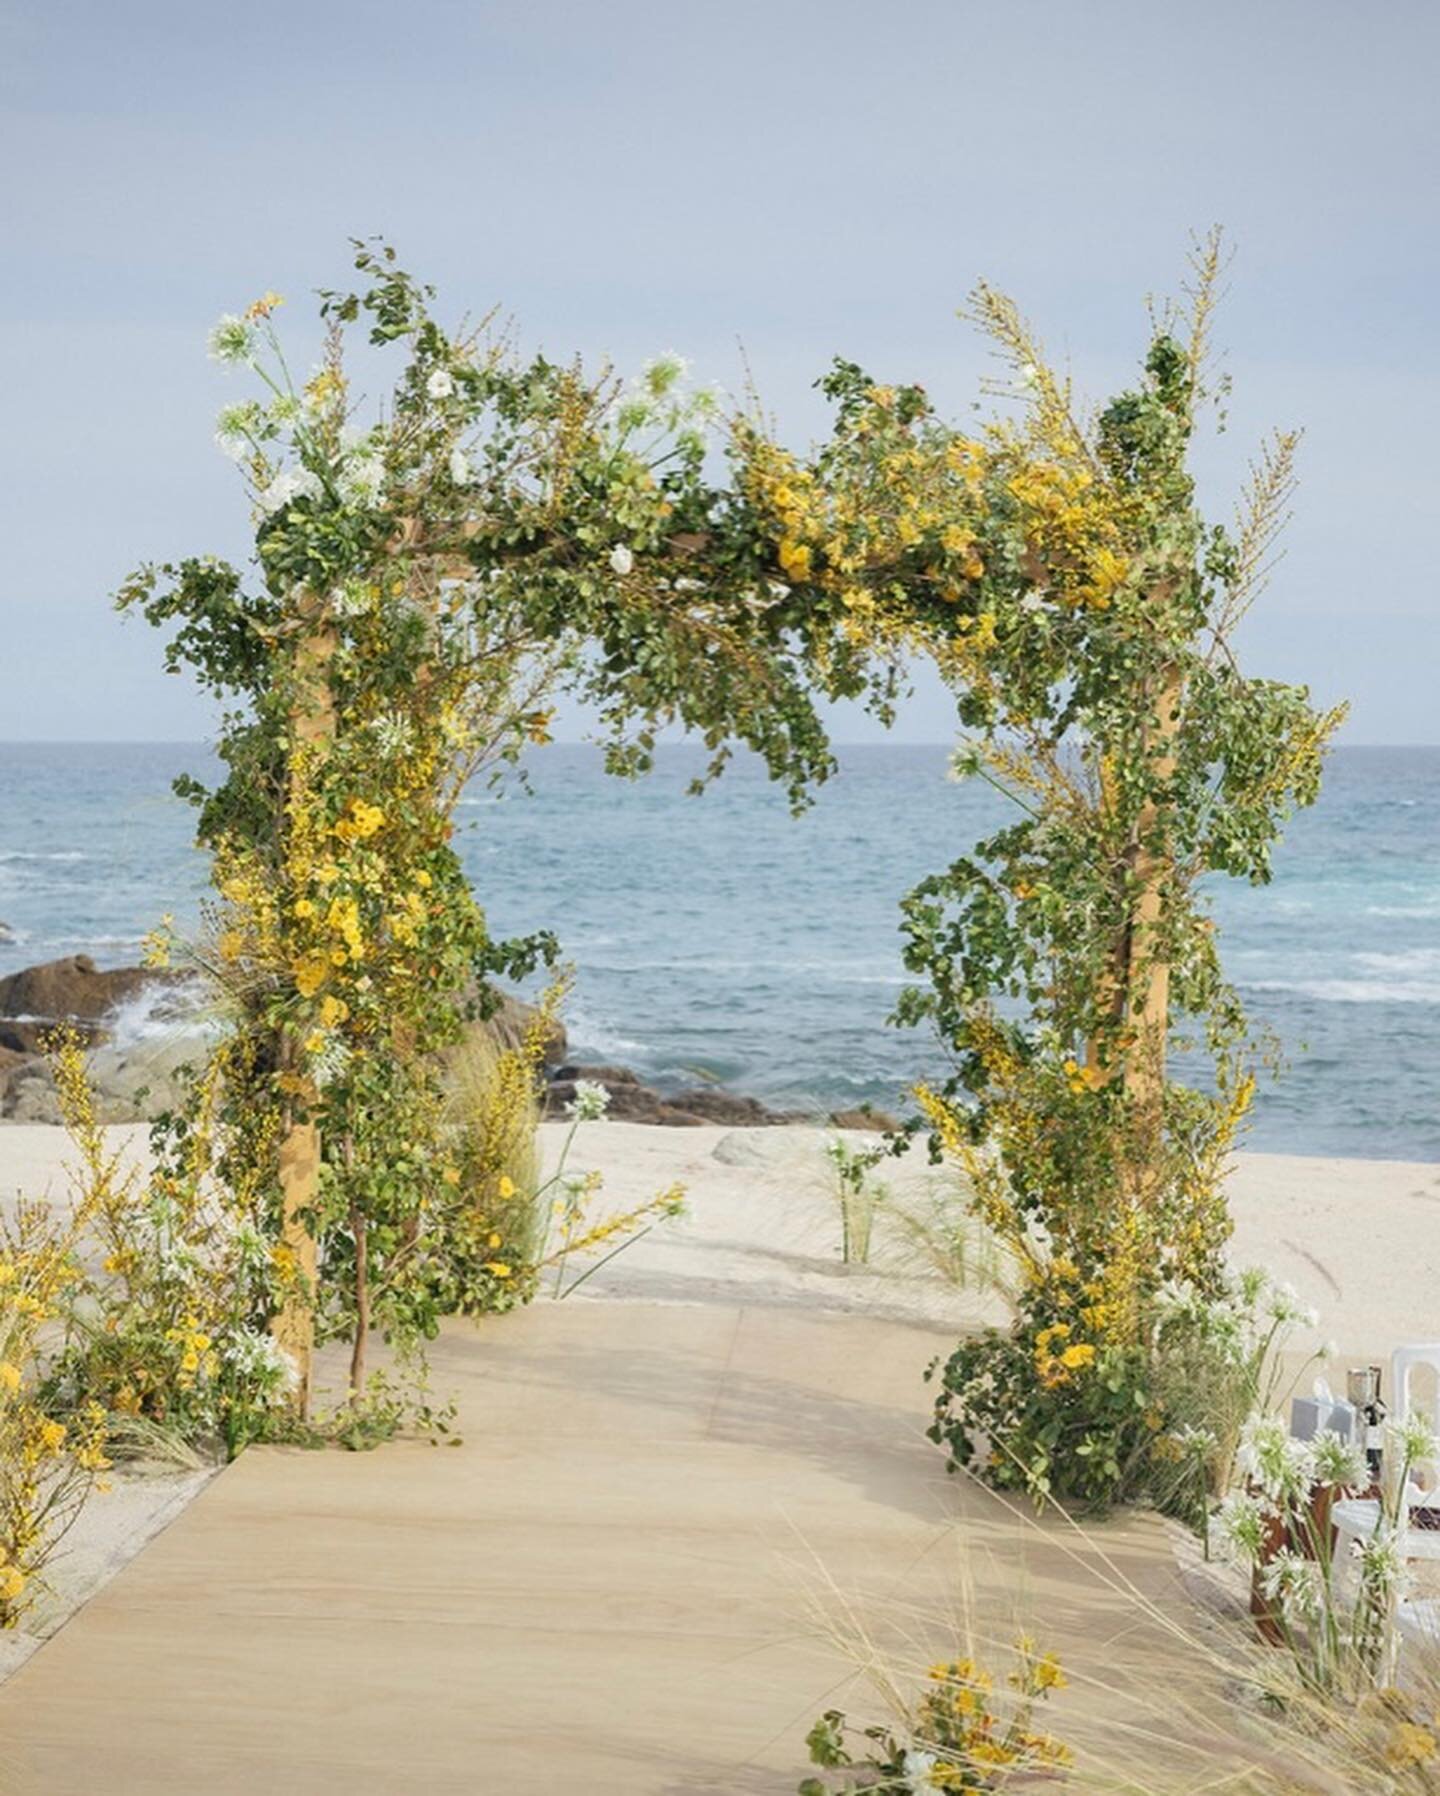 Some more pics from our recent Cabo wedding! Courtney and Mike tied the knot in a breathtaking ceremony overlooking the stunning Cabo coastline. It was an absolute dream. We had the pleasure of creating the signage, programs, and vows booklet for the